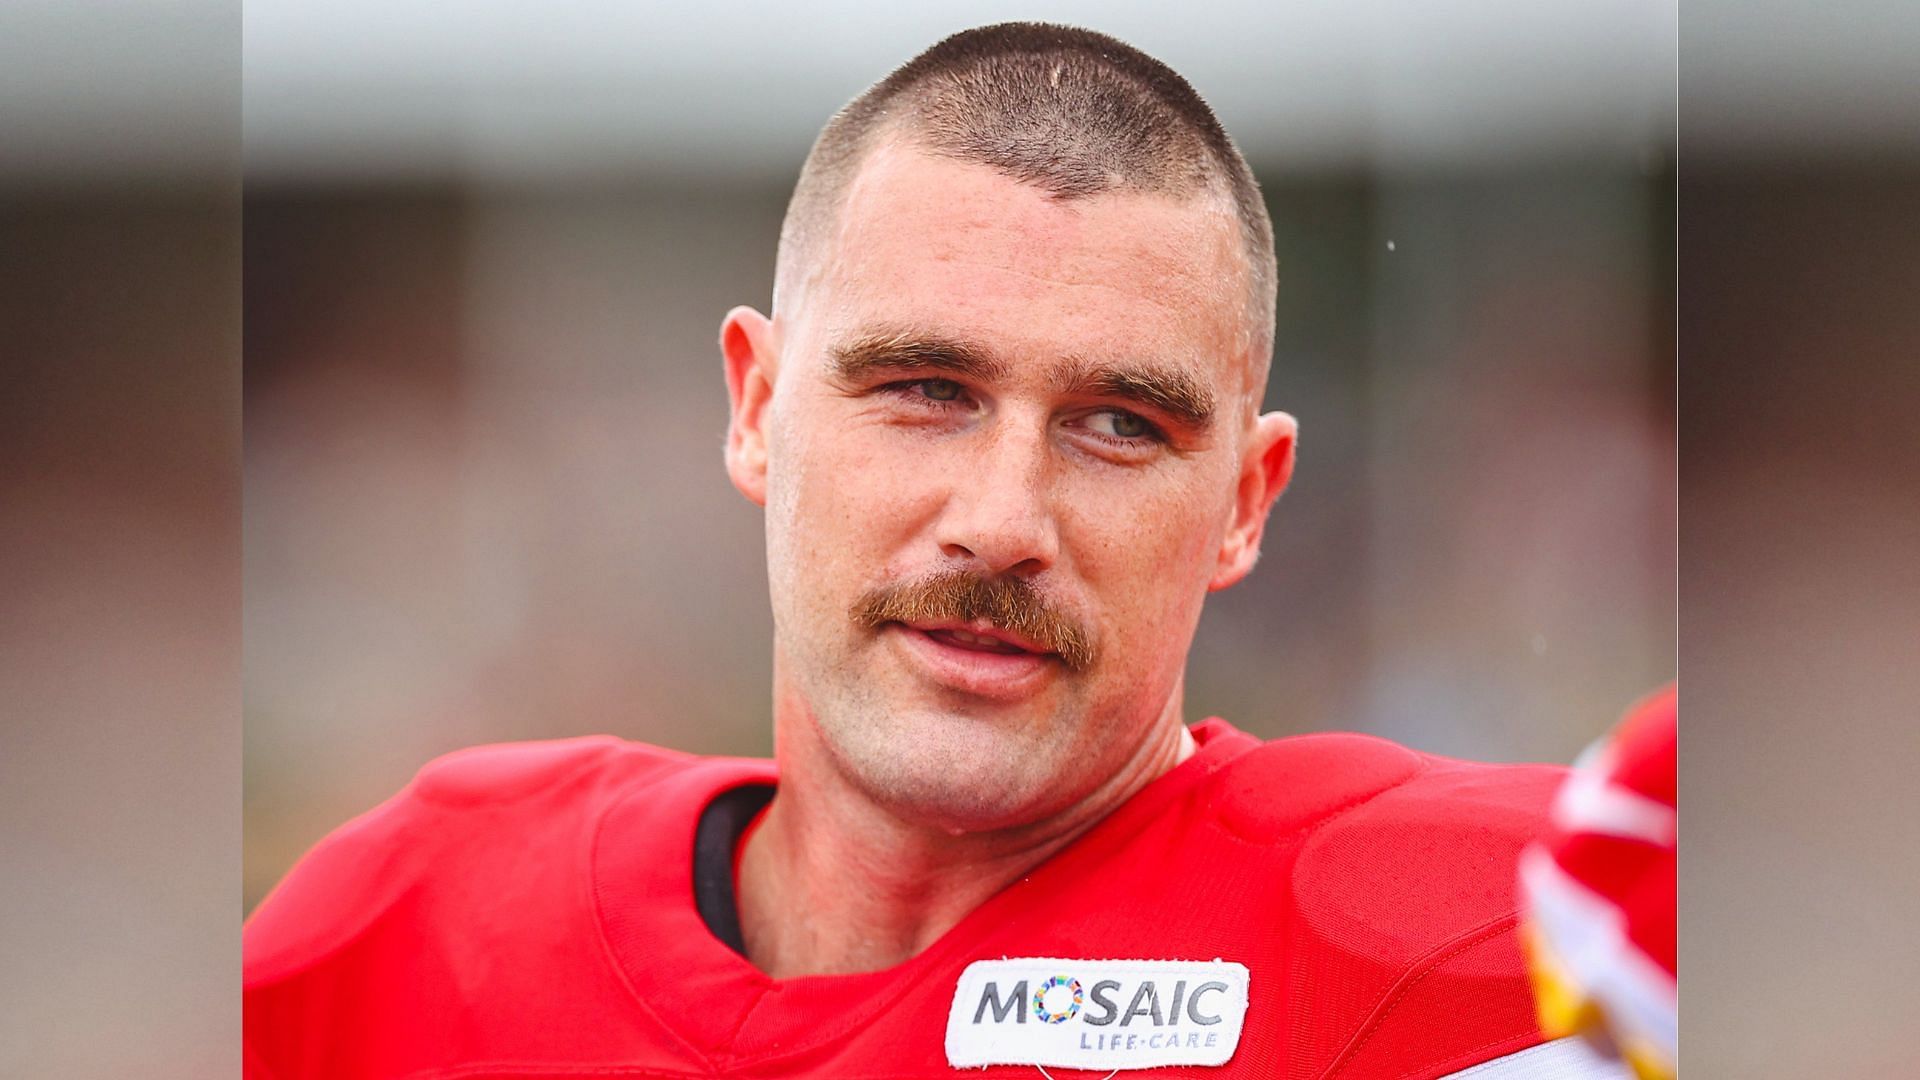 All-Pro tight end Travis Kelce is rocking a mustache again. (Image credit: Kansas City Chiefs on Twitter)